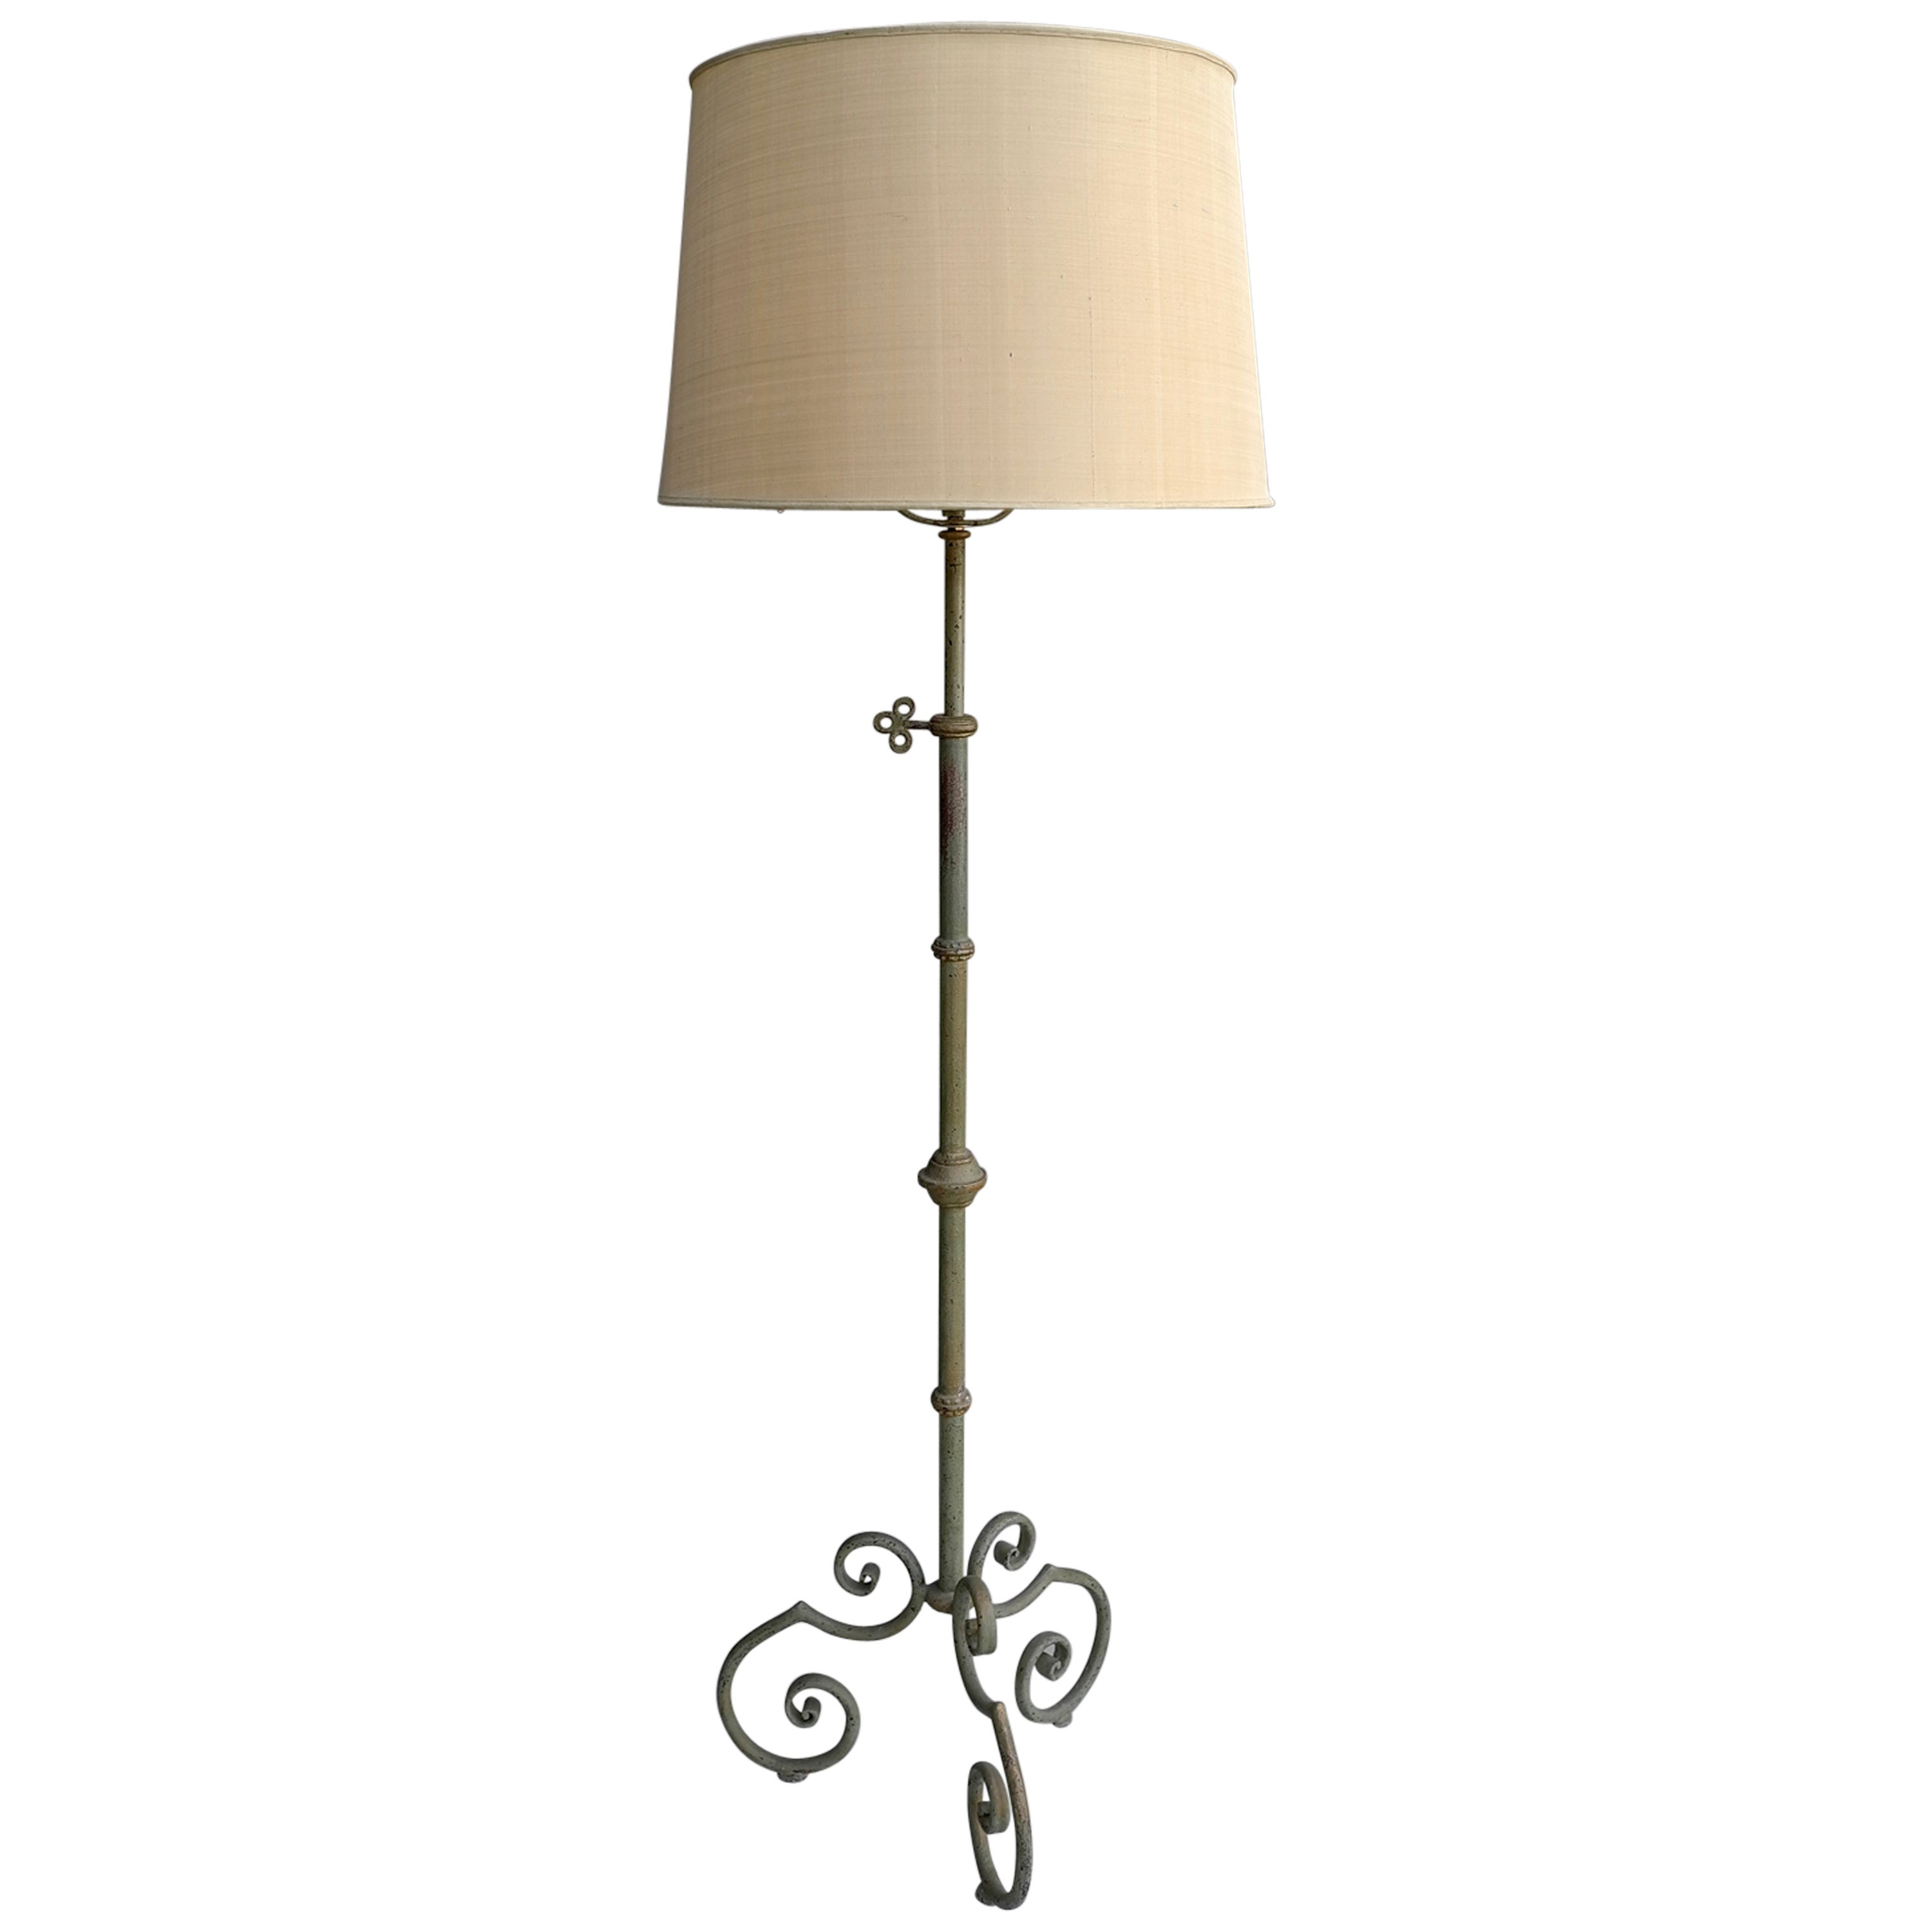 Wrought Iron Provincial Green Patina Floorlamp with Silk Shade, France, 1940's For Sale